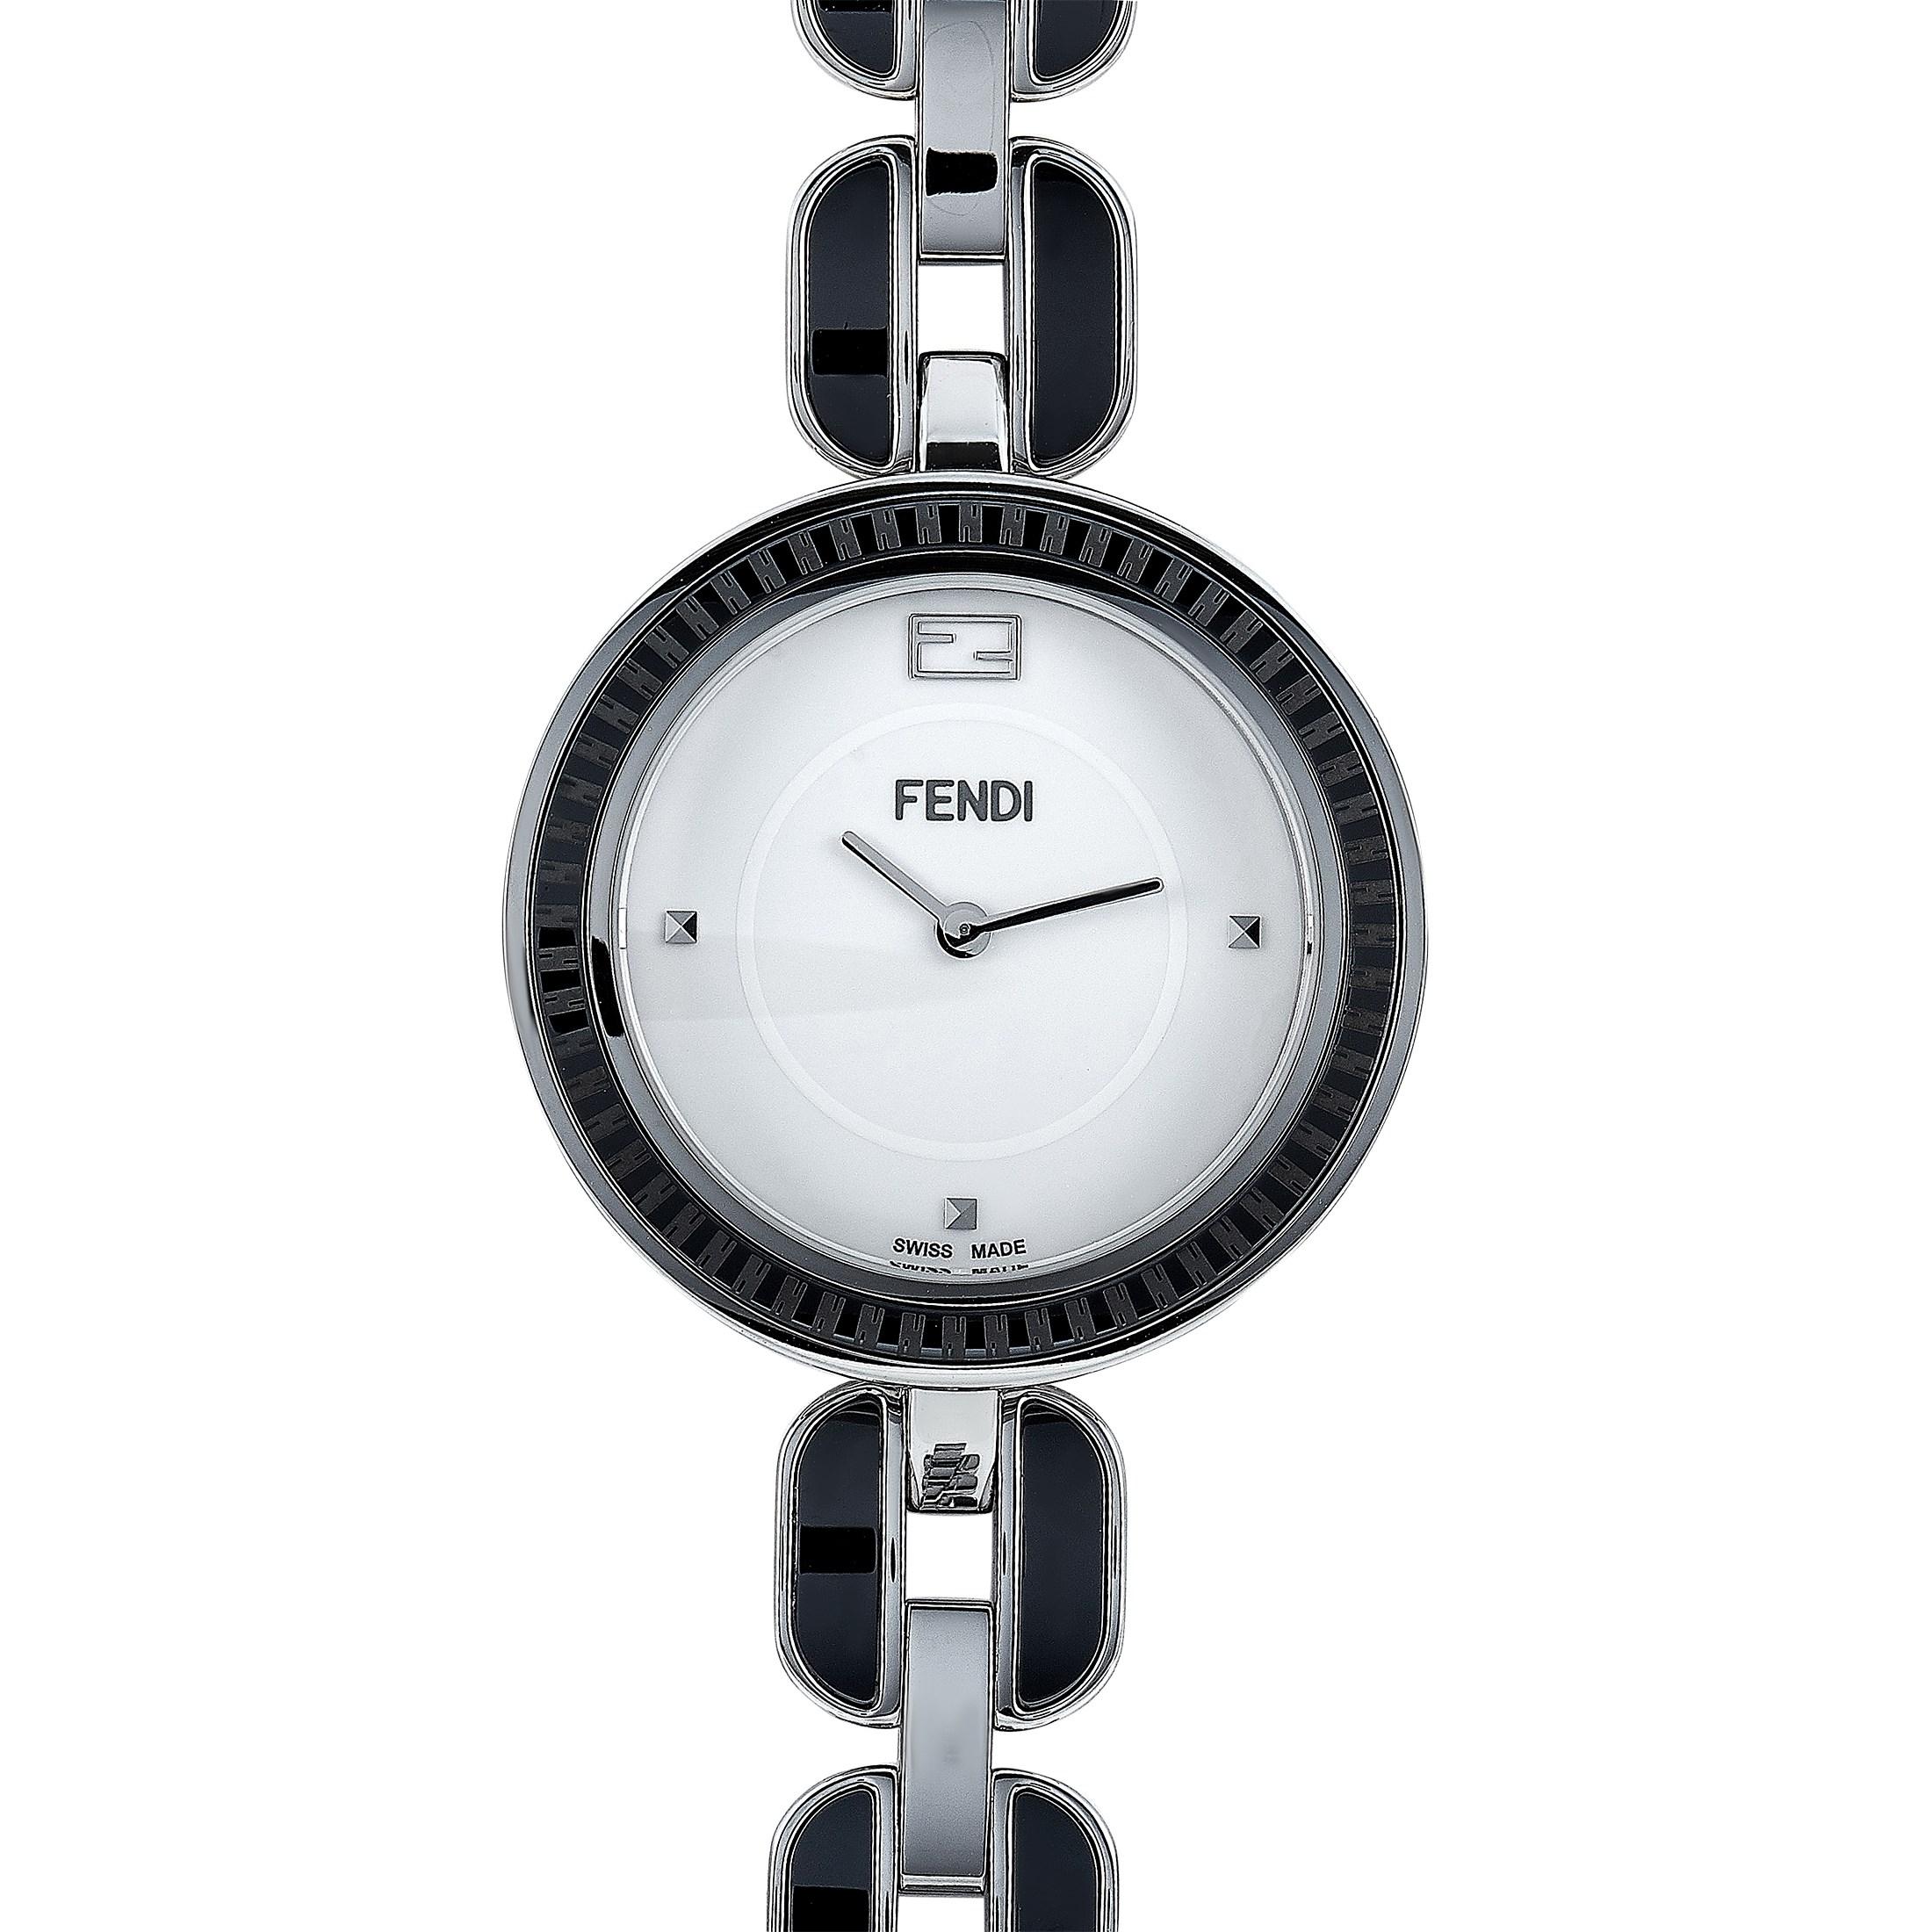 The Fendi My Way watch, reference number F353034001, comes with a 36 mm stainless steel case that boasts a bezel with a black ceramic inlay. The case is presented on a stainless steel bracelet with black ceramic inserts. This model is powered by a